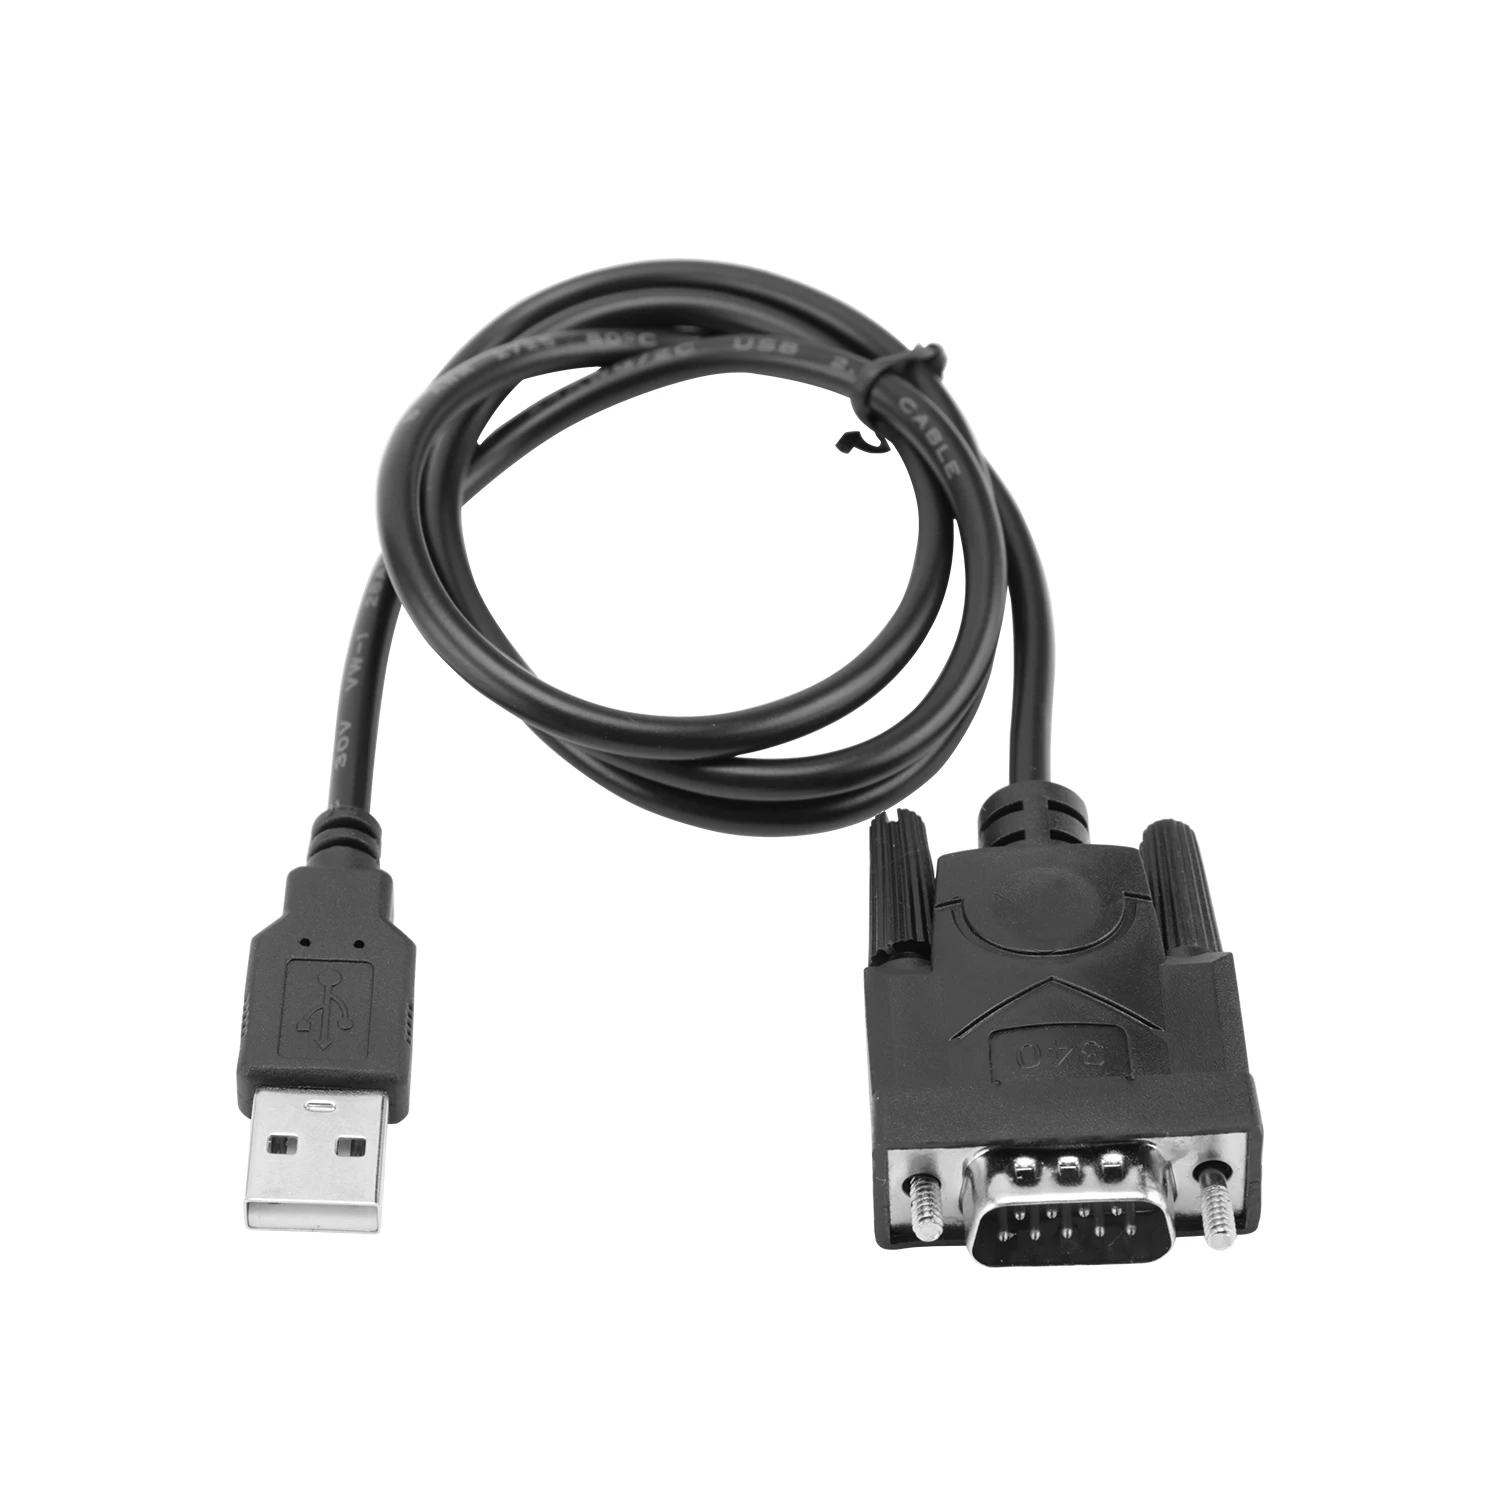 New USB RS232 to DB 9-Pin Male Cable Adapter Converter Supports Win 7 8 10 Pro System Supports various serial devices images - 6